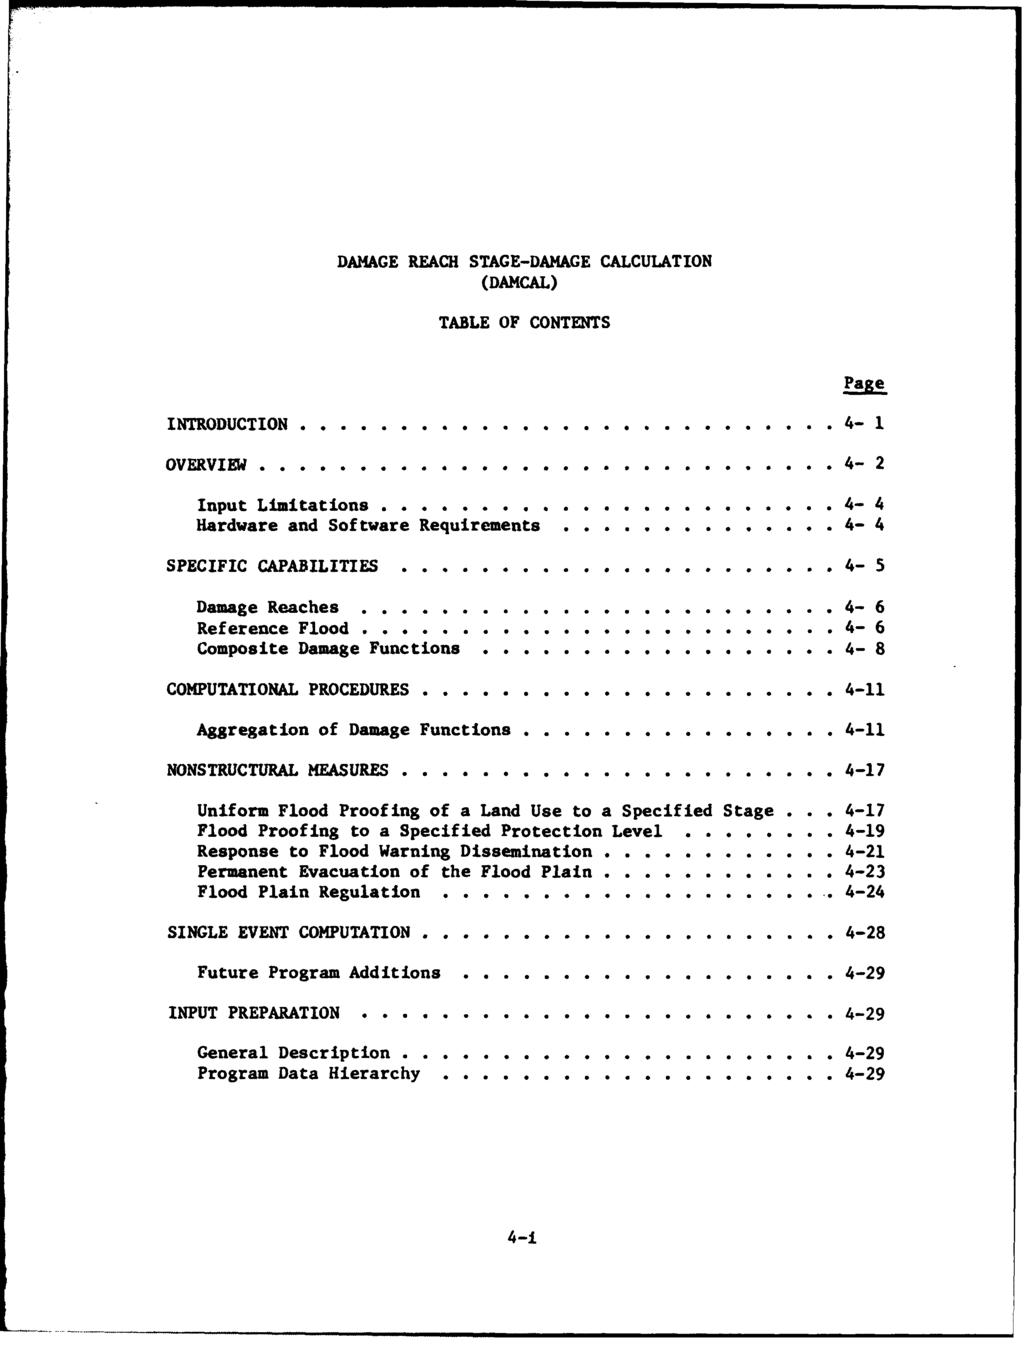 DAMAGE REACH STAGE-DAMAGE CALCULATION (DAMCAL) TABLE OF CONTENTS Page INTRODUCTION... 4-1 OVERVIEW............ 4-2 Input Limitations... 4-4 Hardware and Software Requirements.